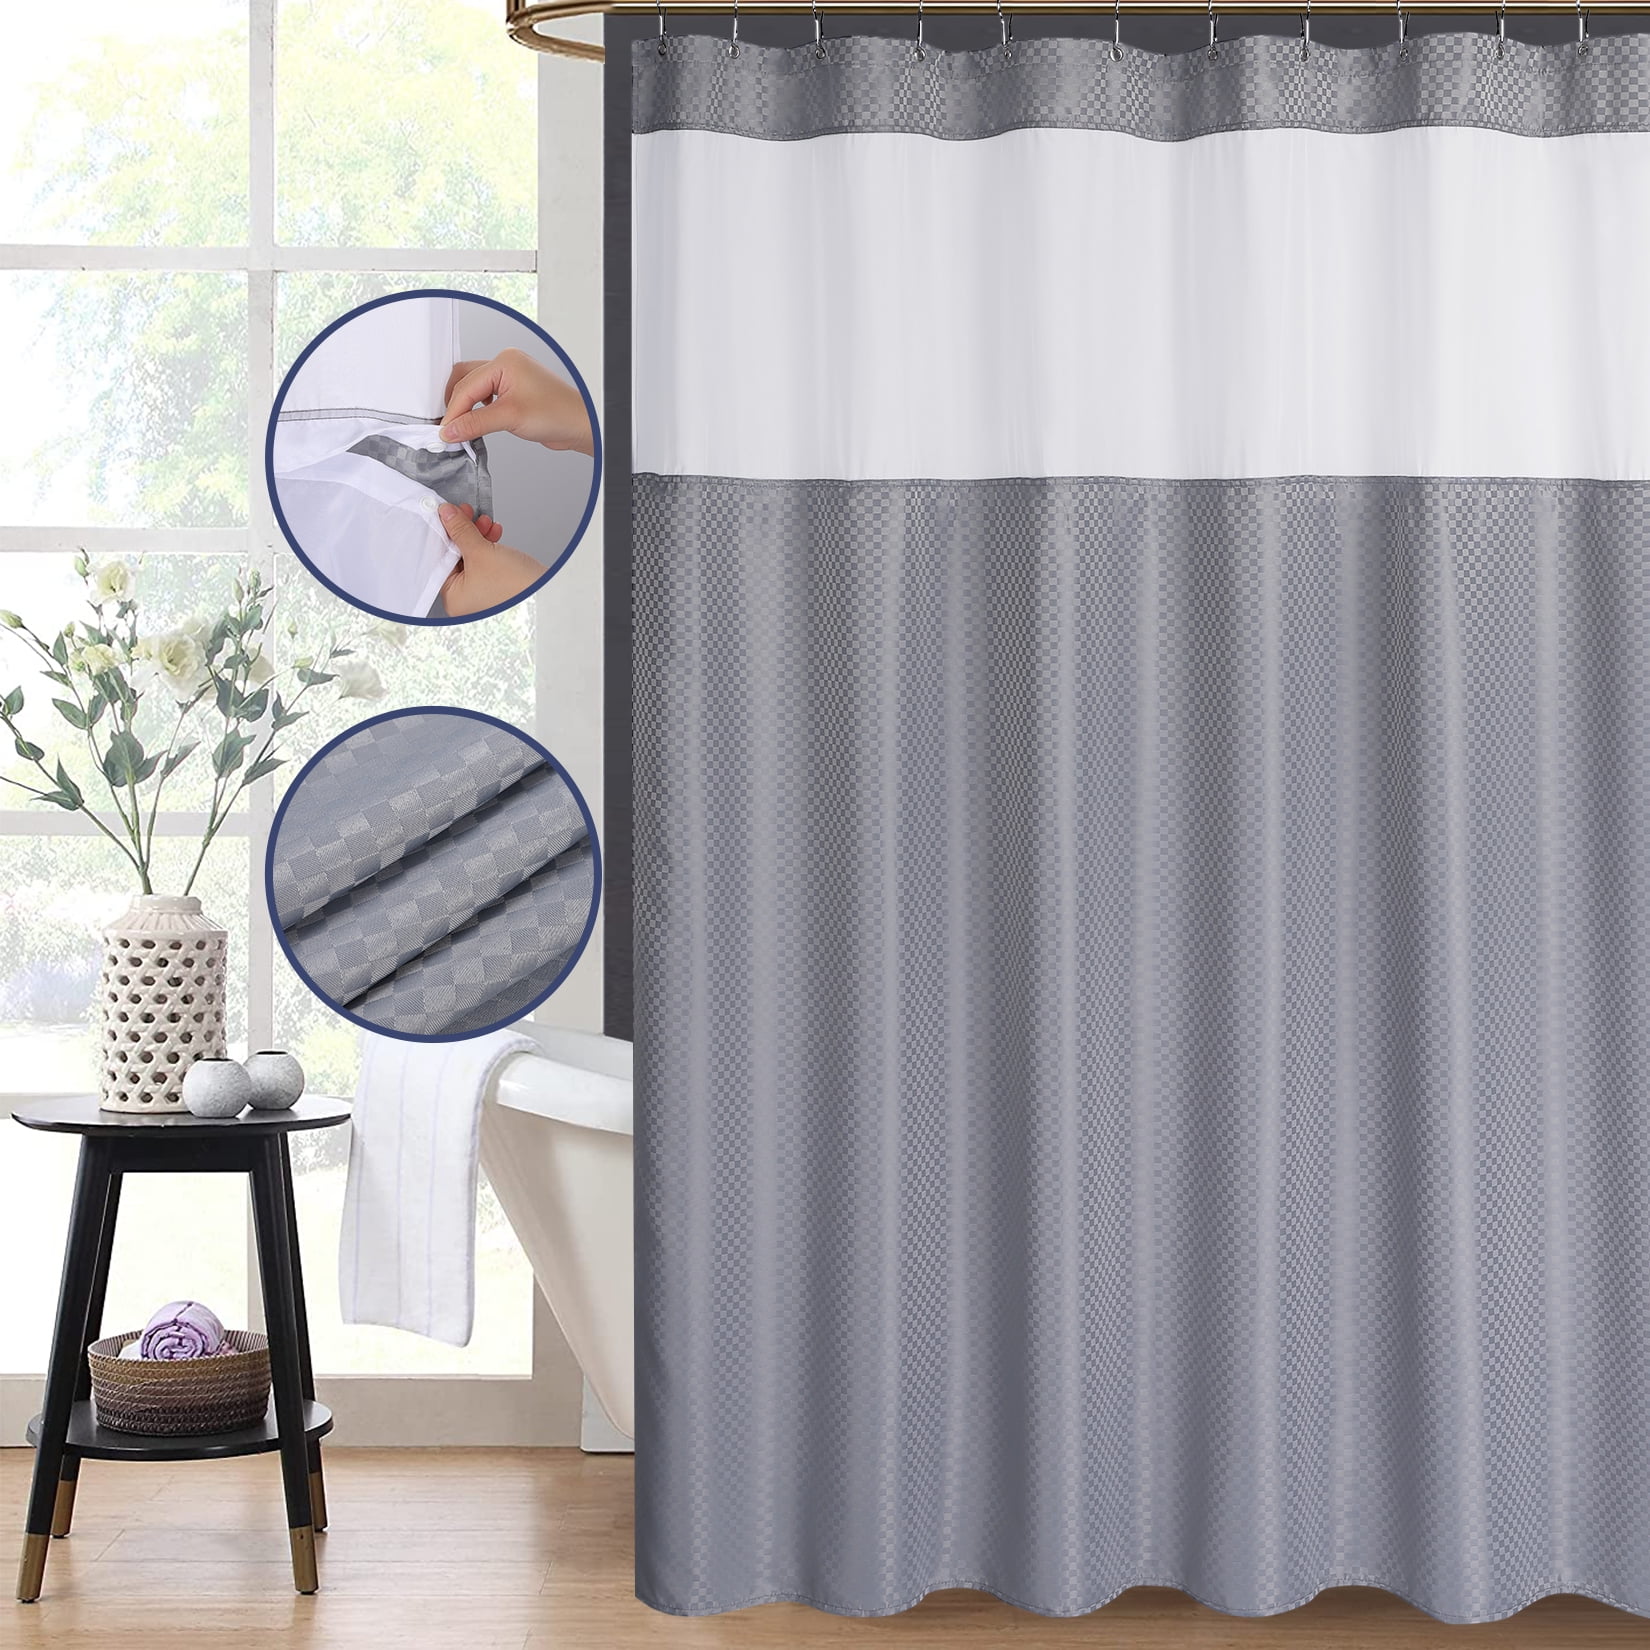 BTTN Waffle Stall Heavy Duty Shower Curtains 280 GSM Hotel Quality Weighted Fabric Shower Curtain for Bathroom 183x91cm,Black Mould Proof Resistant Waterproof Curtain Liner Set with Hooks